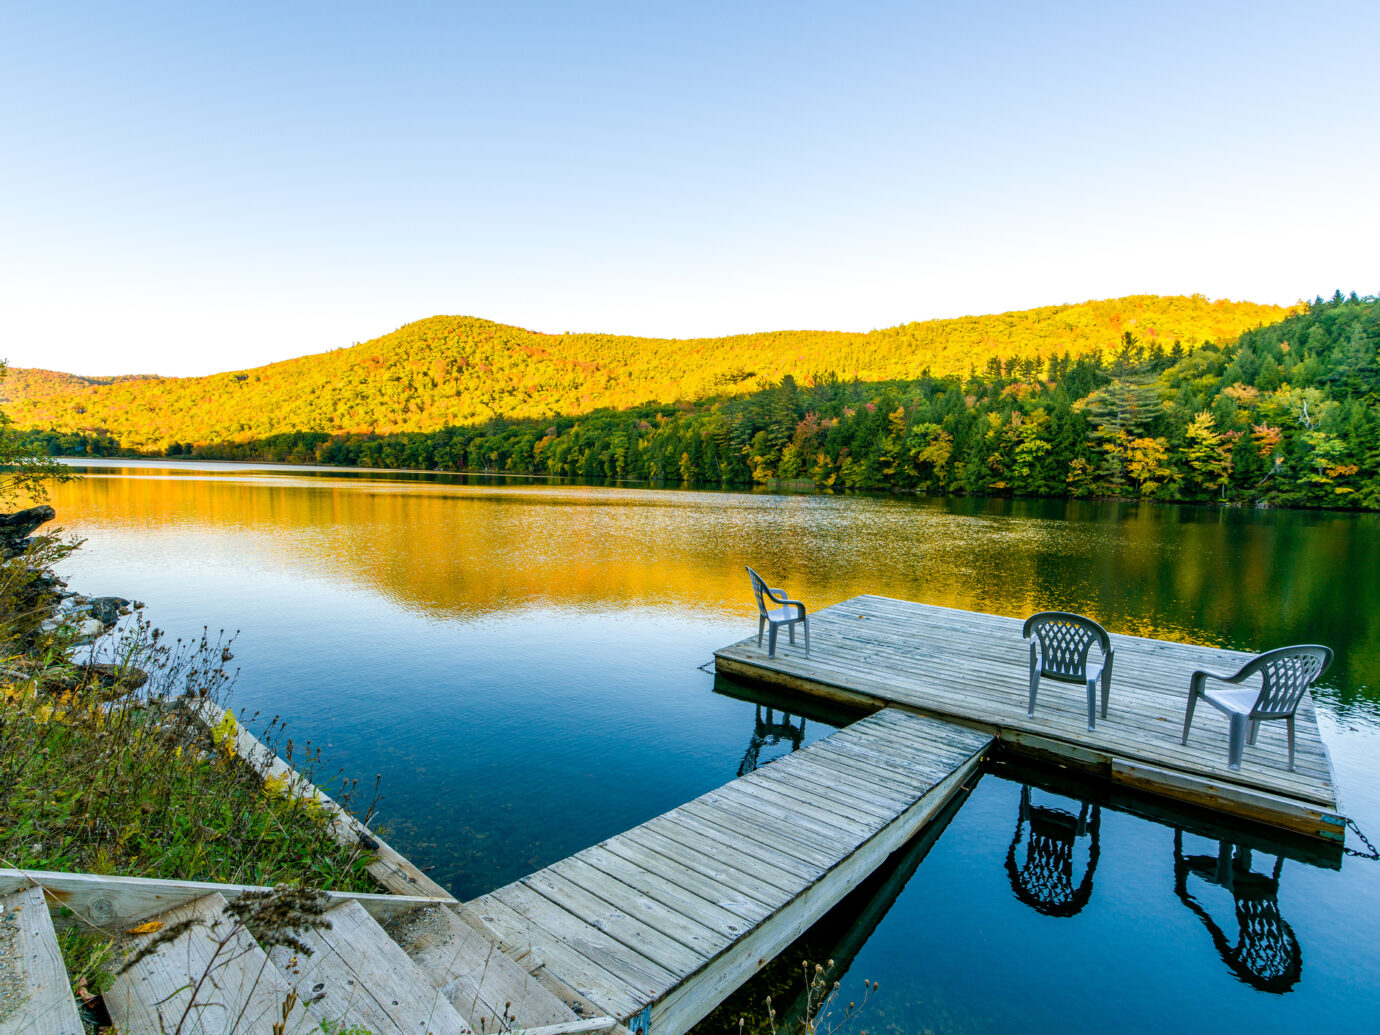 A small deck in the middle of a lake in Vermont. Three chairs are on the deck, inviting people to have a rest